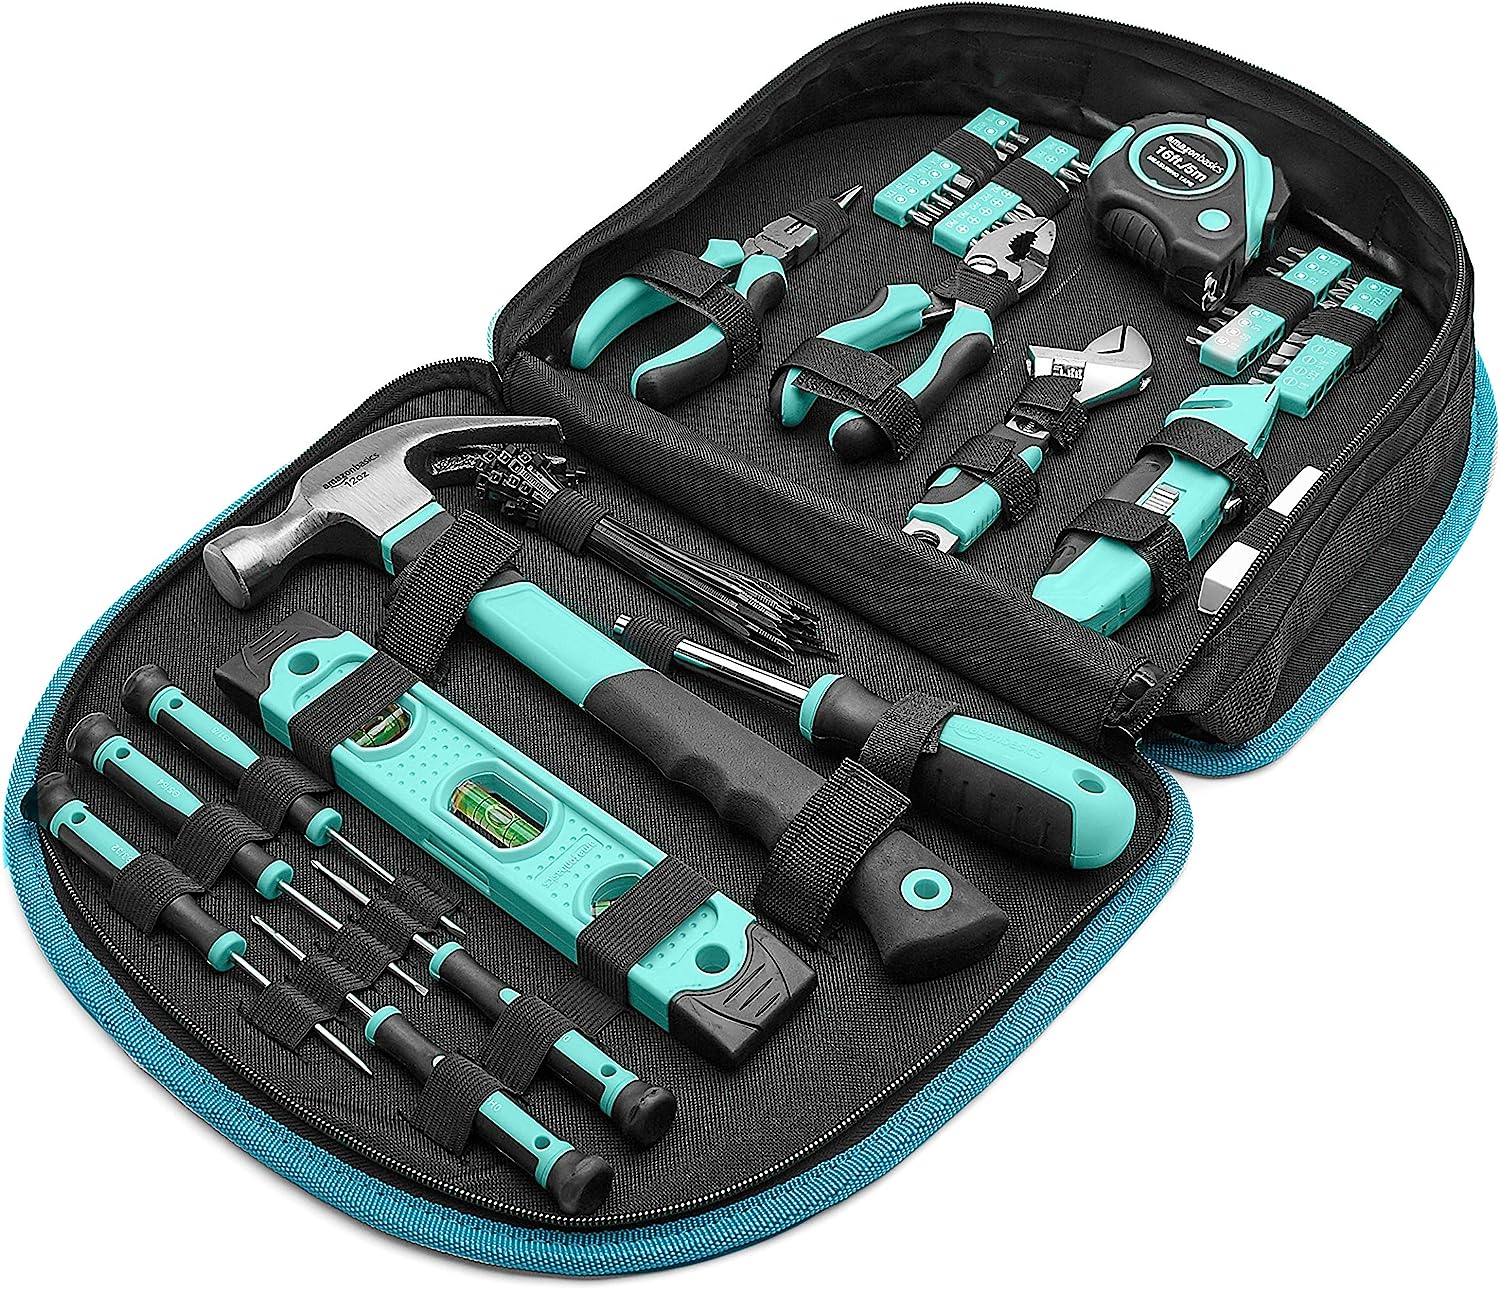 Amazon Basics Tool Set With Easy Carrying Round Pouch, [...]